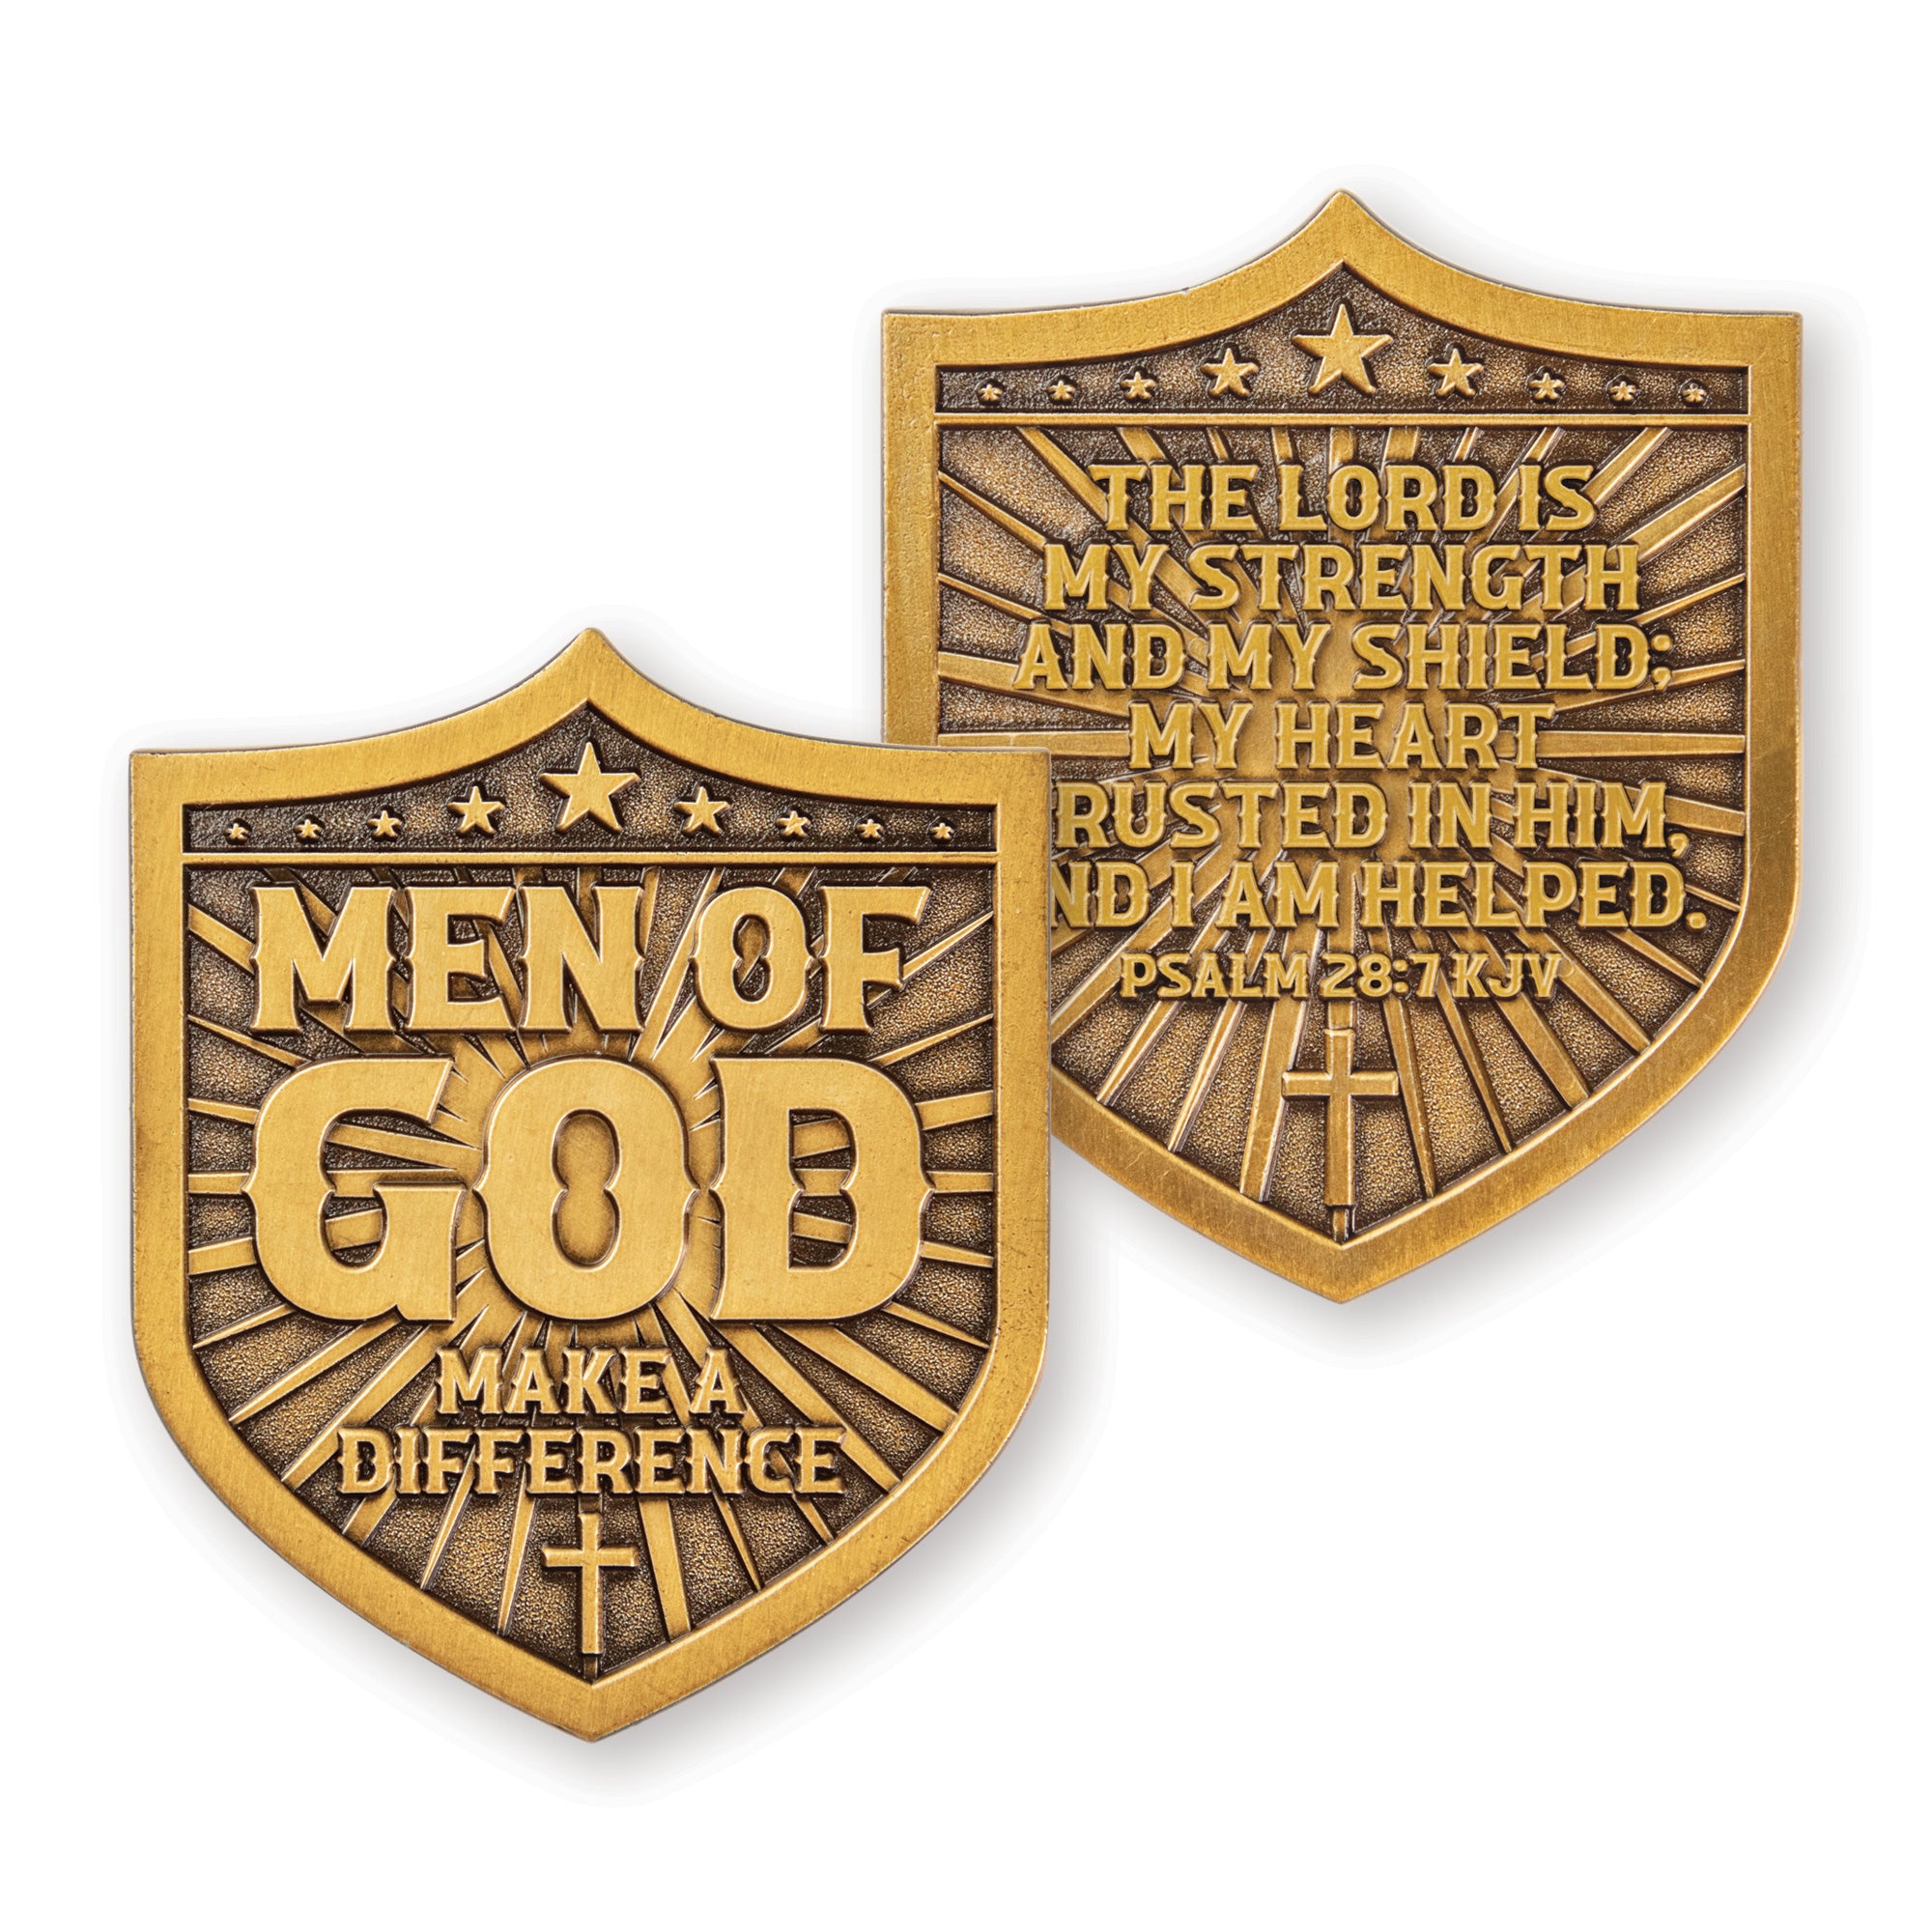 Make a Difference – Psalm 28:7 KJV Challenge Coin